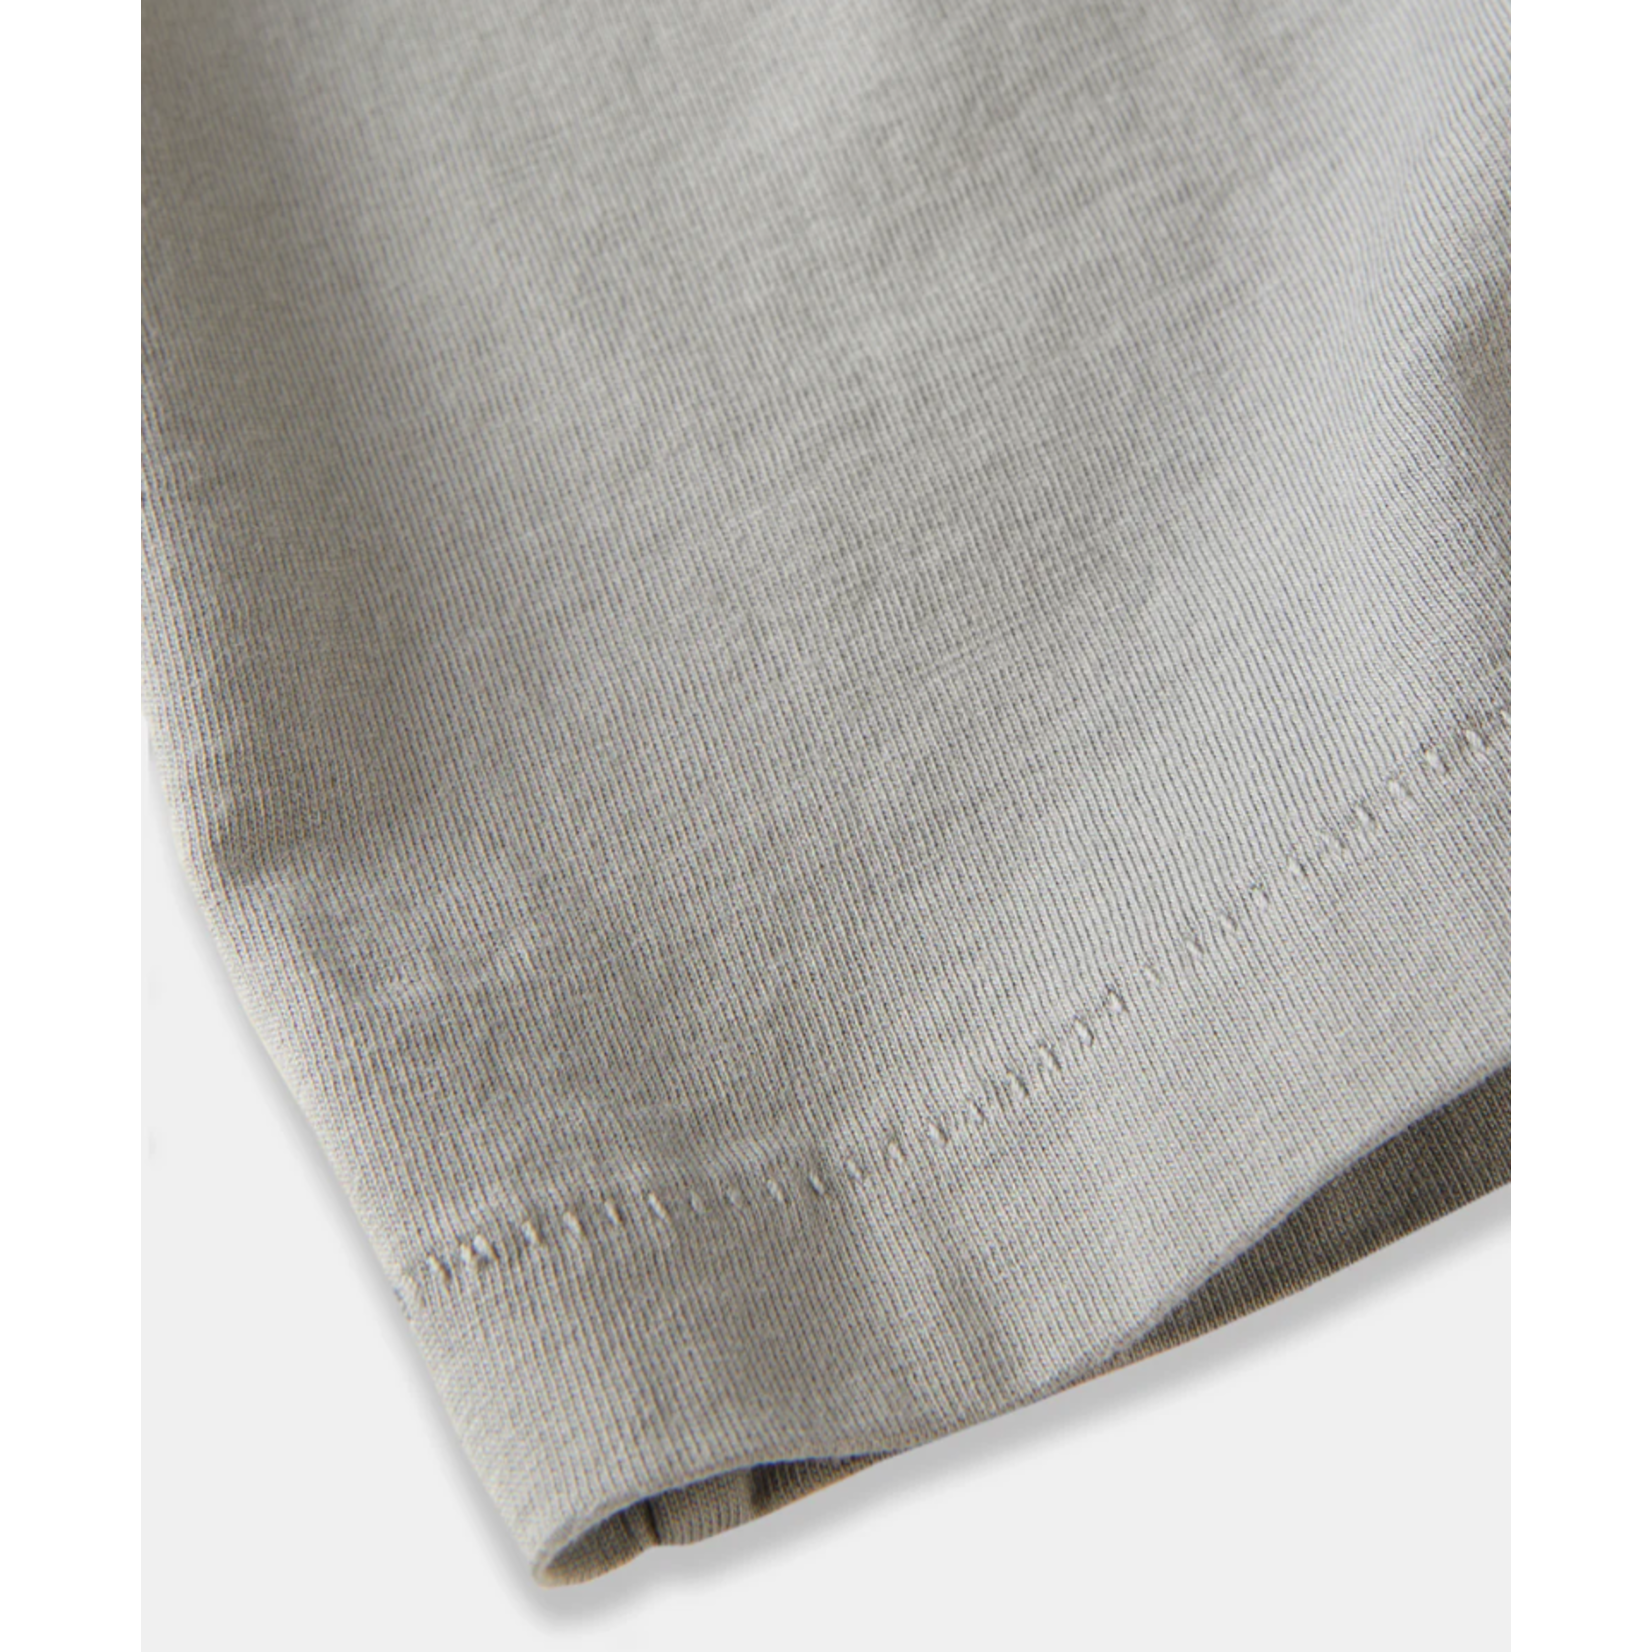 Outerknown Sojourn L/S Pocket Tee